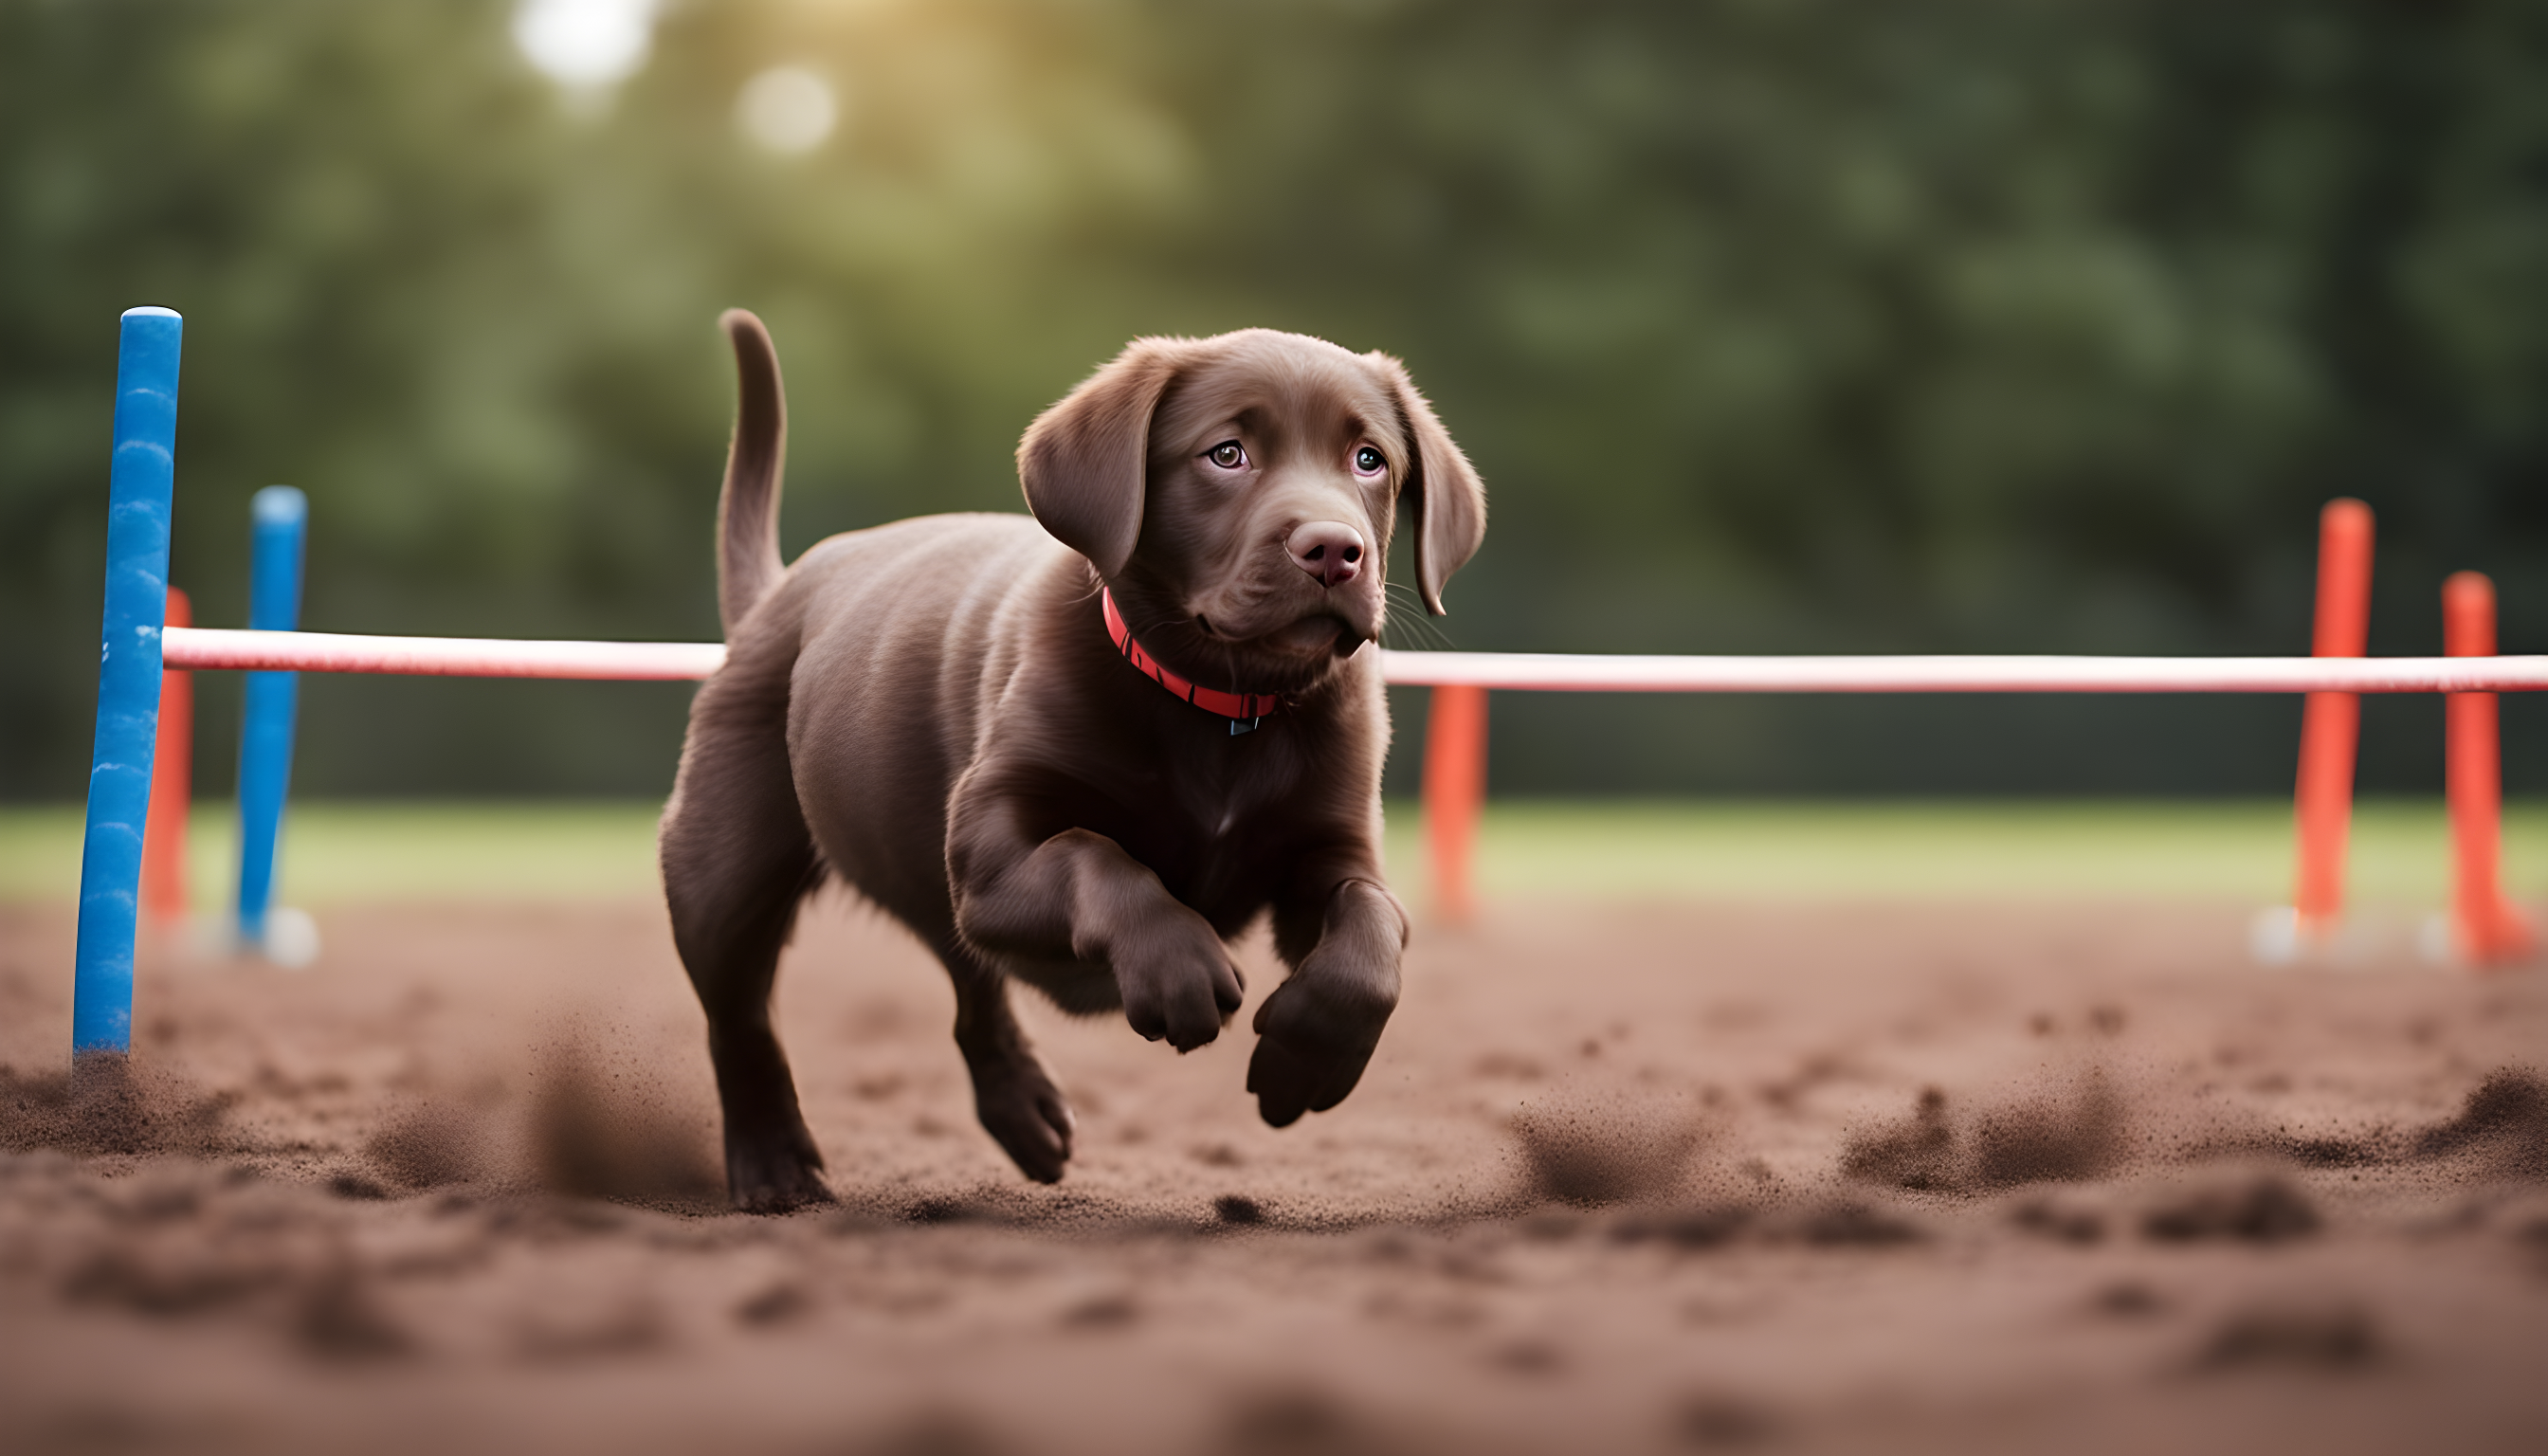 A focused Chocolate Lab puppy navigating through an agility course, highlighting the transition to advanced training.